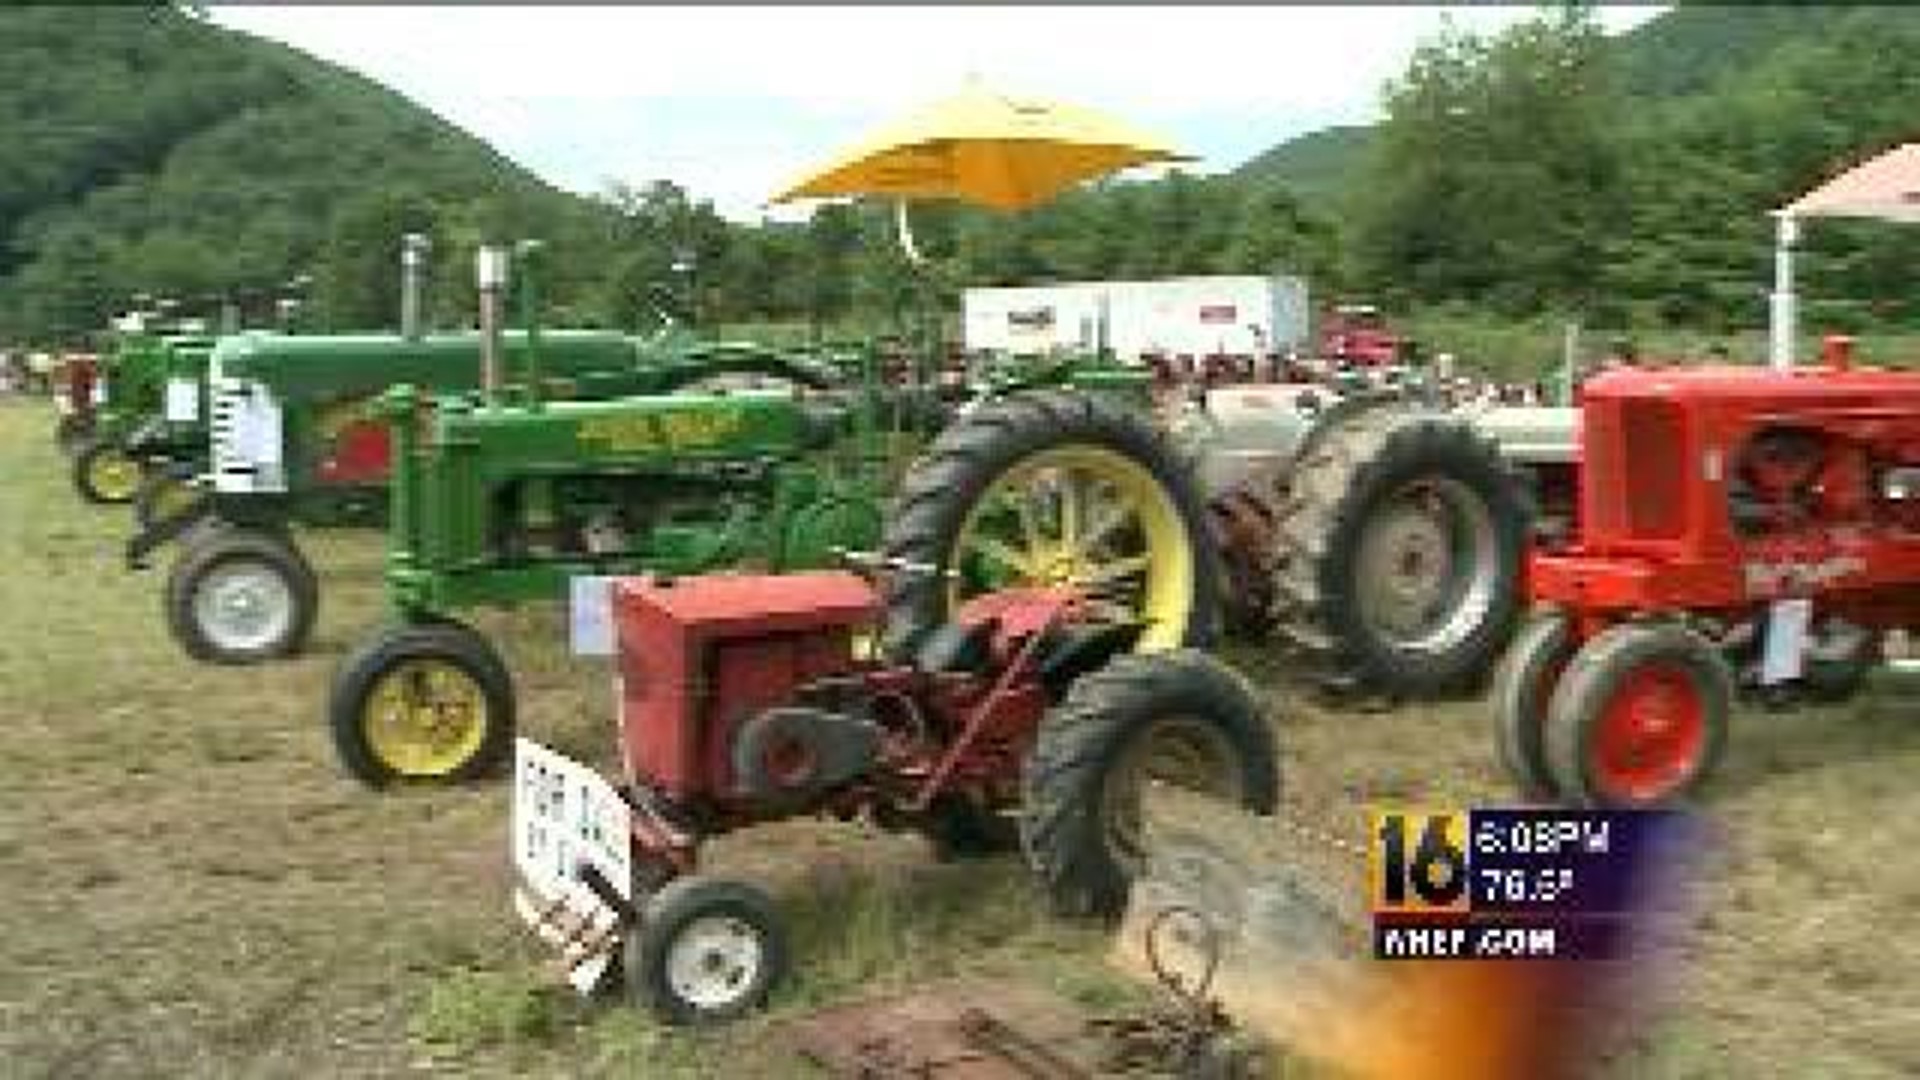 Turn Back Time in Lycoming County